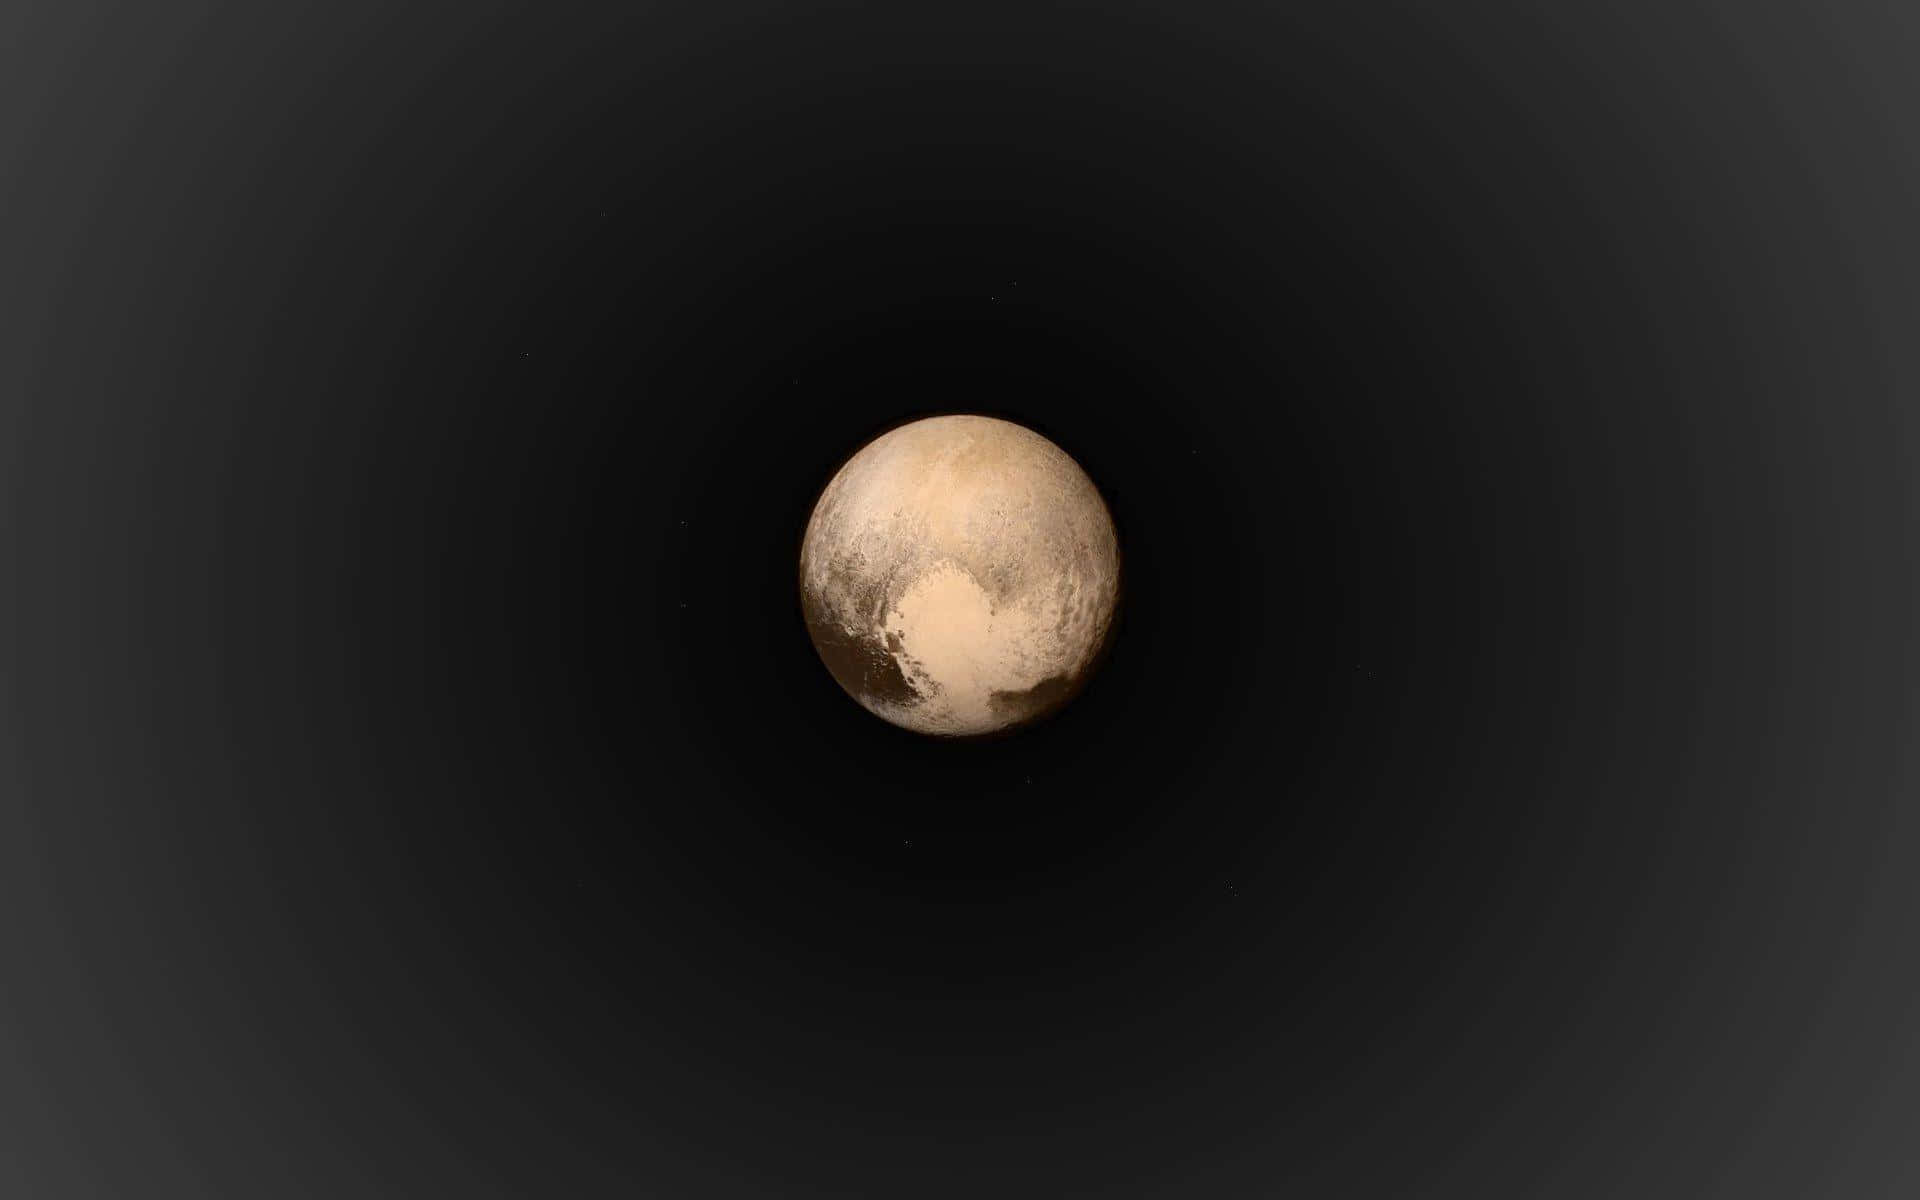 "Pluto, an icy celestial body at the edge of our Solar System."